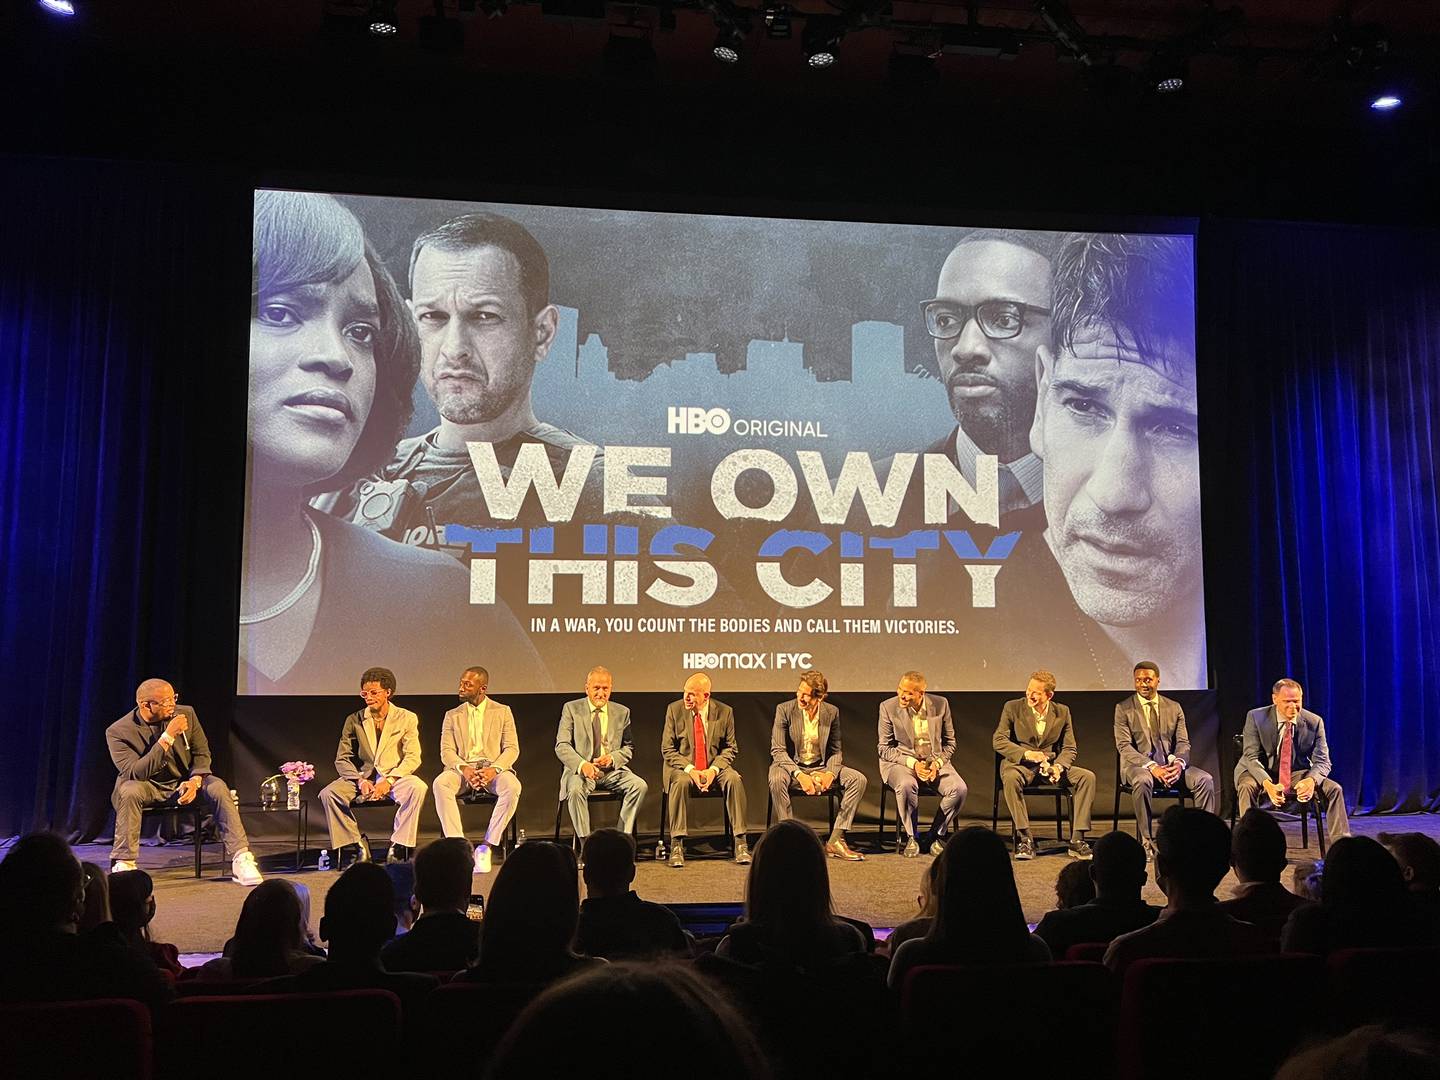 A panel discussion with the cast, producers and director at the New York City premiere of "We Own This City," led by writer D Watkins, left.